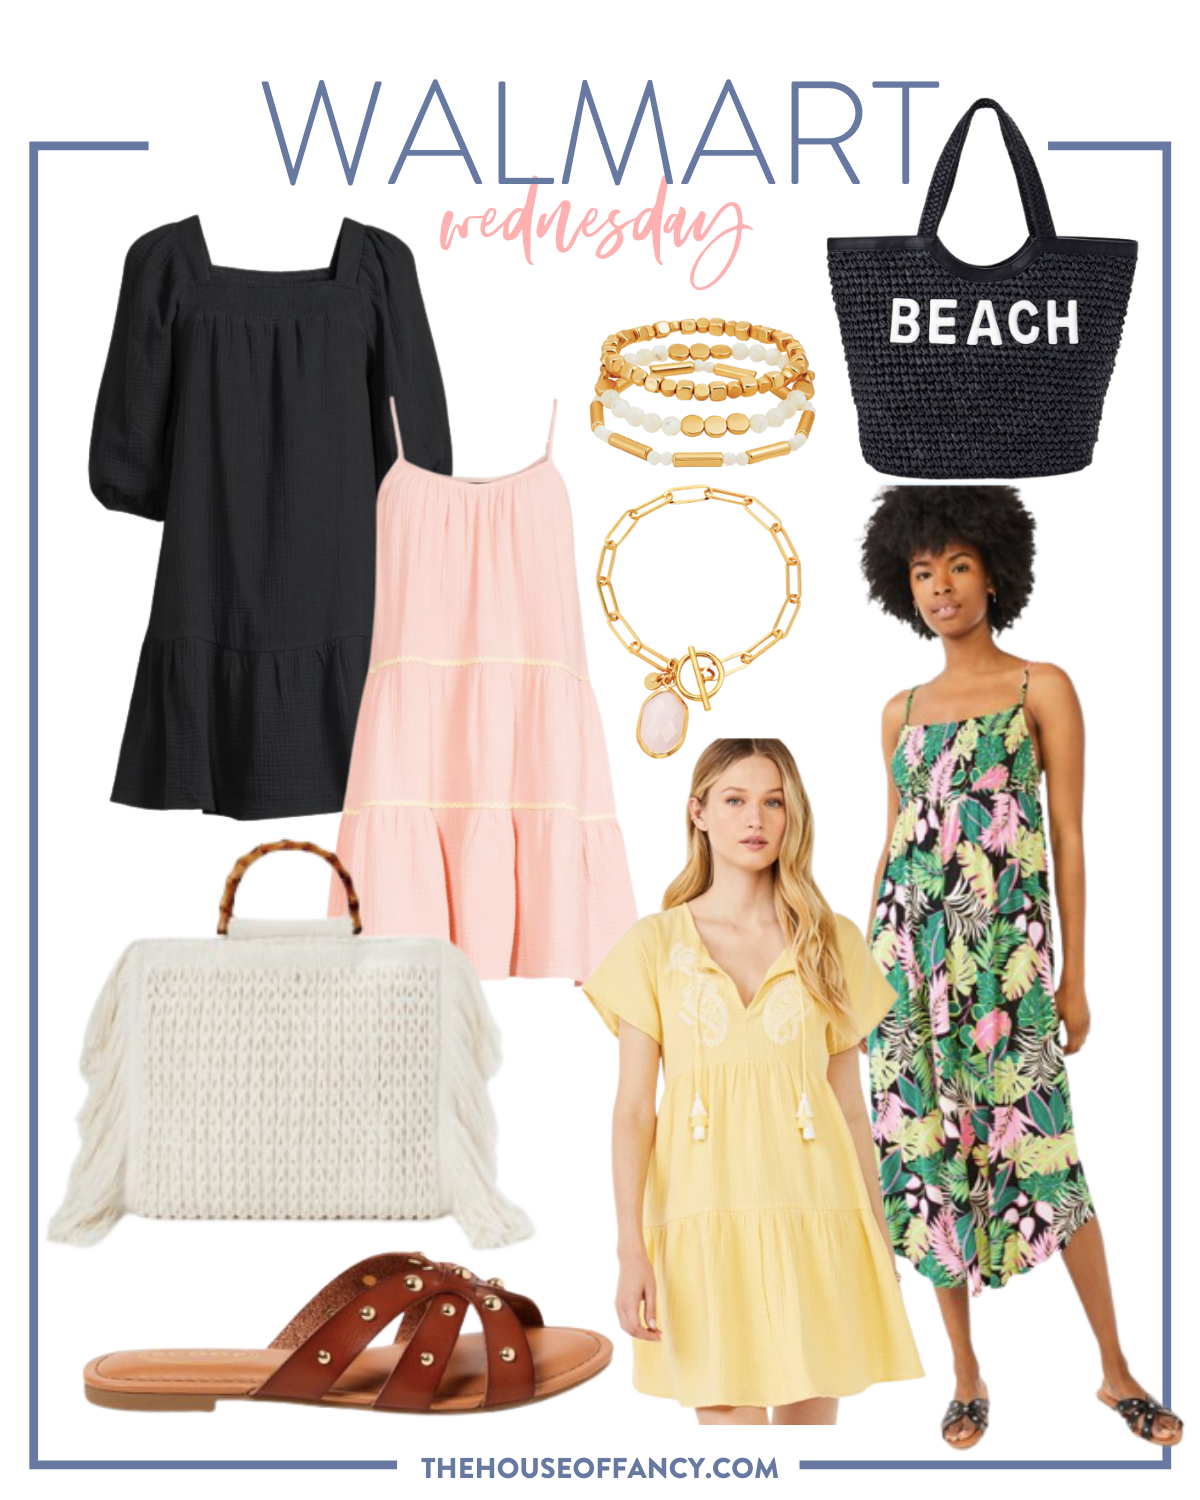 Walmart New Arrivals by popular Houston fashion blog, The House of Fancy: collage image of a black babydoll dress, pink tiered spaghetti stripe dress, black straw beach tote, gold link bracelet, gold and white stretch bracelets, tropical pint strap dress, yellow embroidered dress, gold studded brown strap slide sandals, and woven white fringe handbag. 